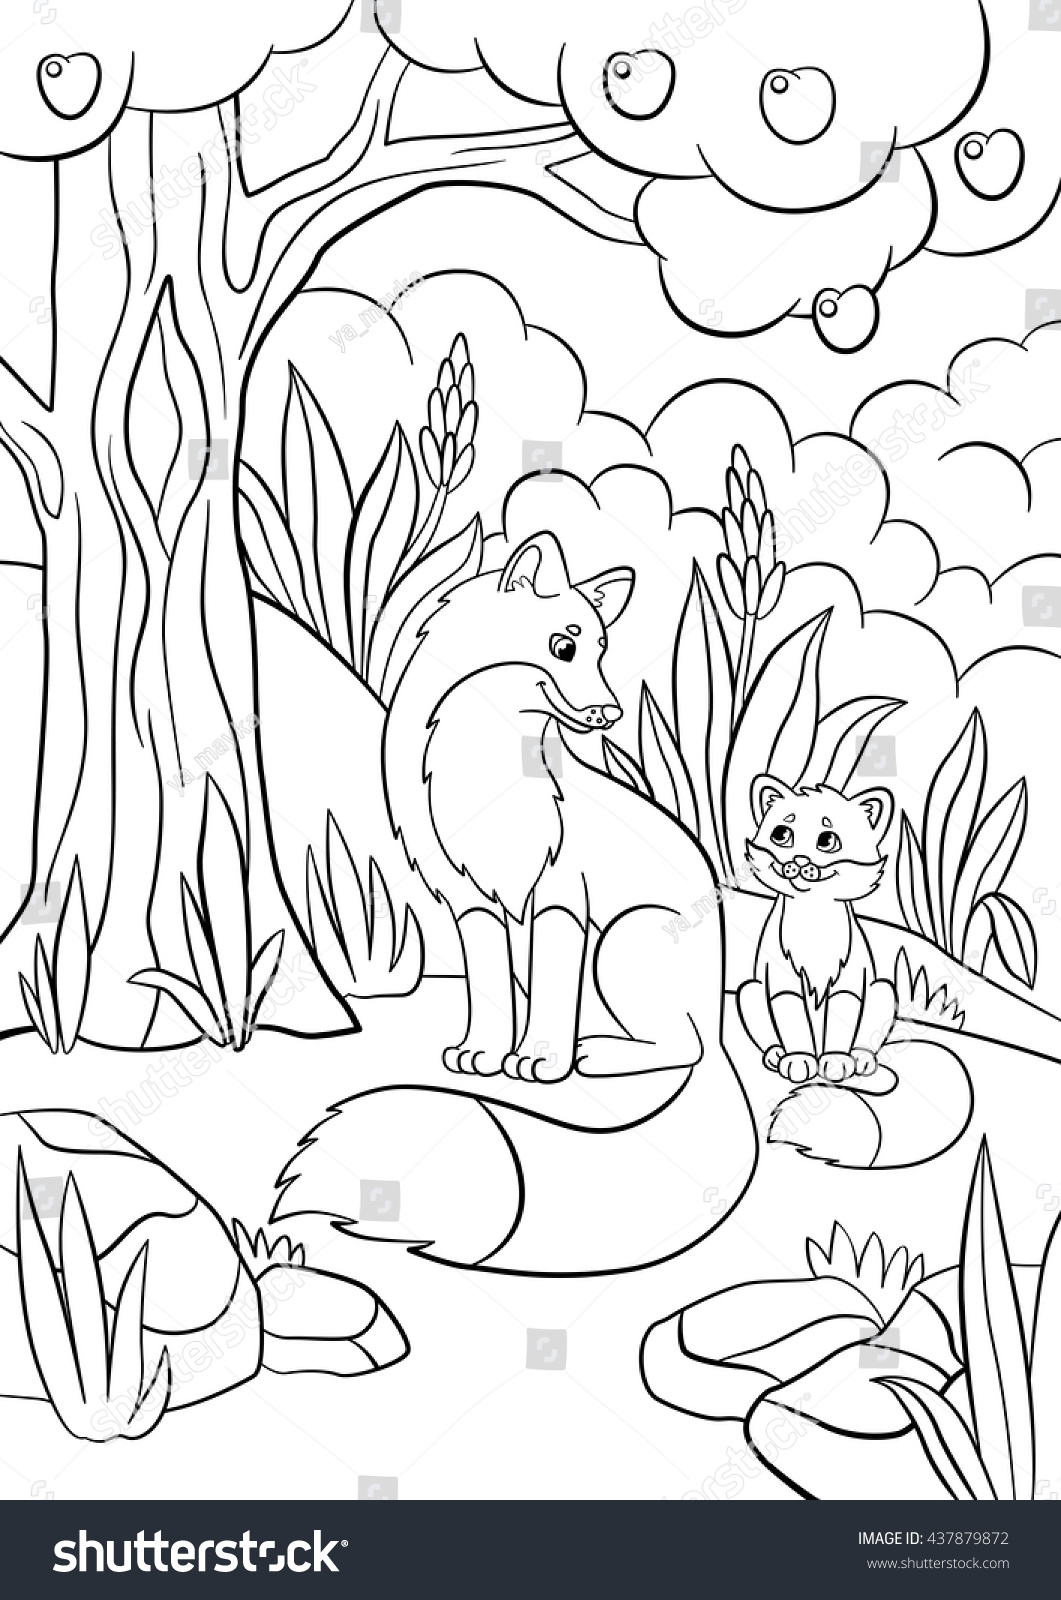 Coloring pages Wild animals Mother fox with her little cute baby fox in the